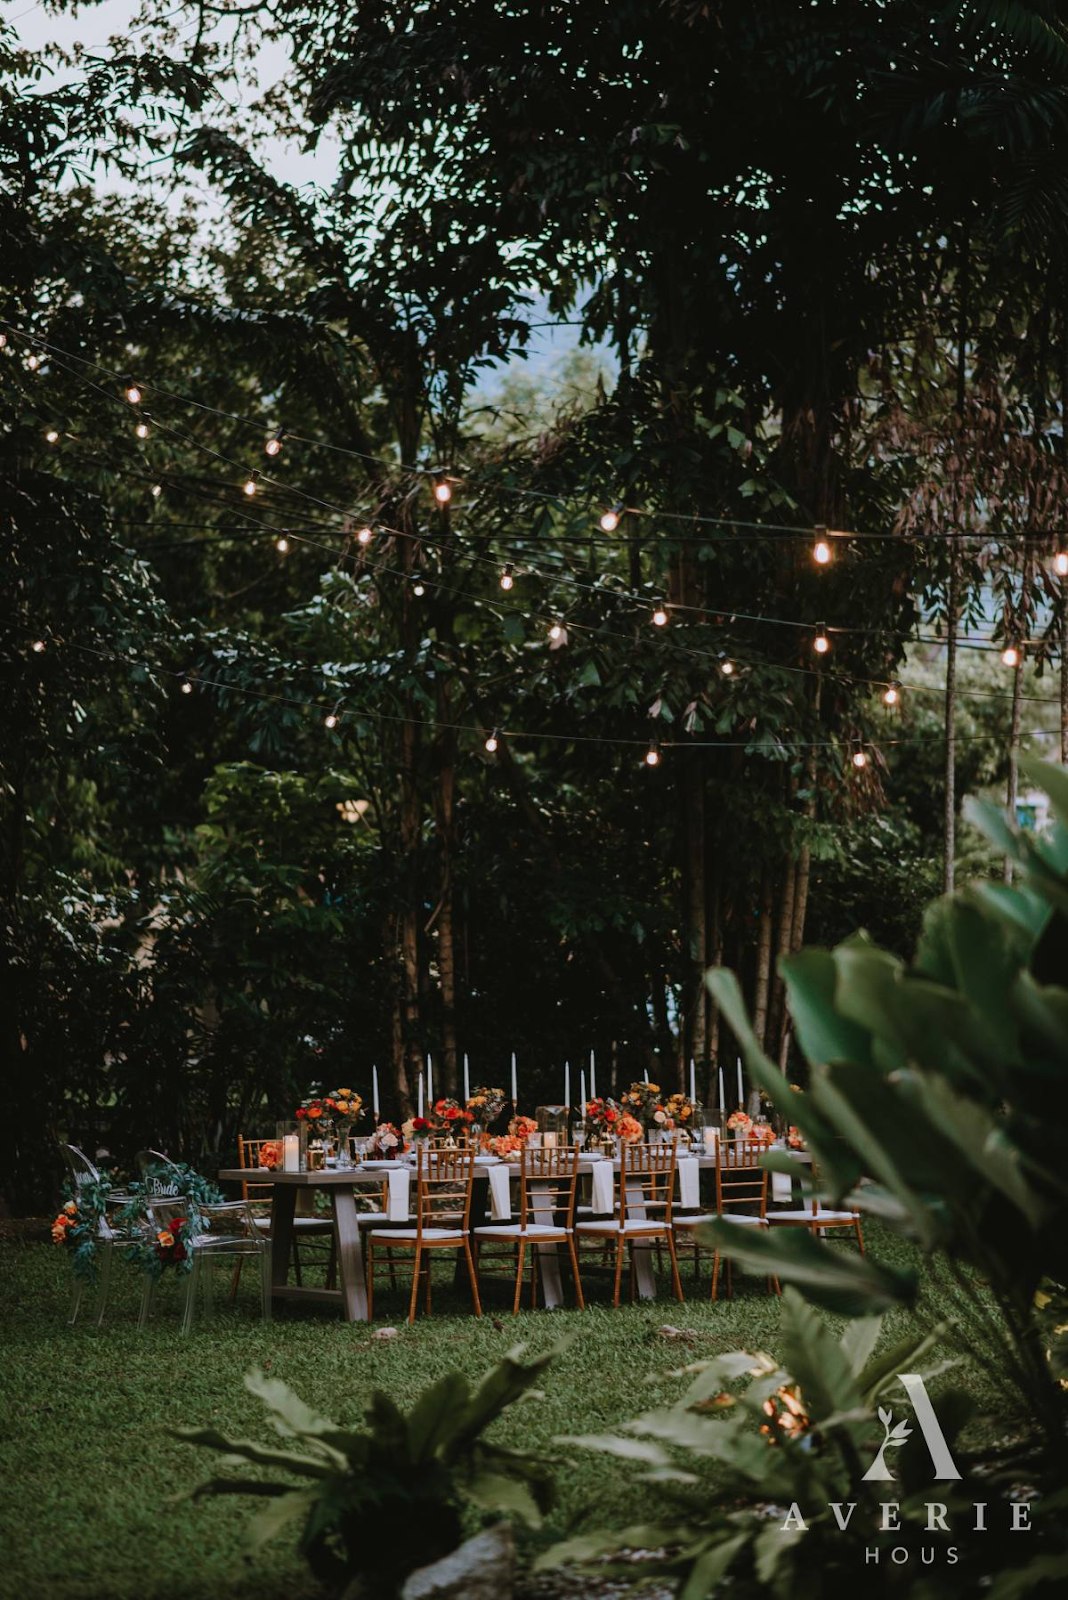 Averie Hous can give you the perfect intimate garden wedding.